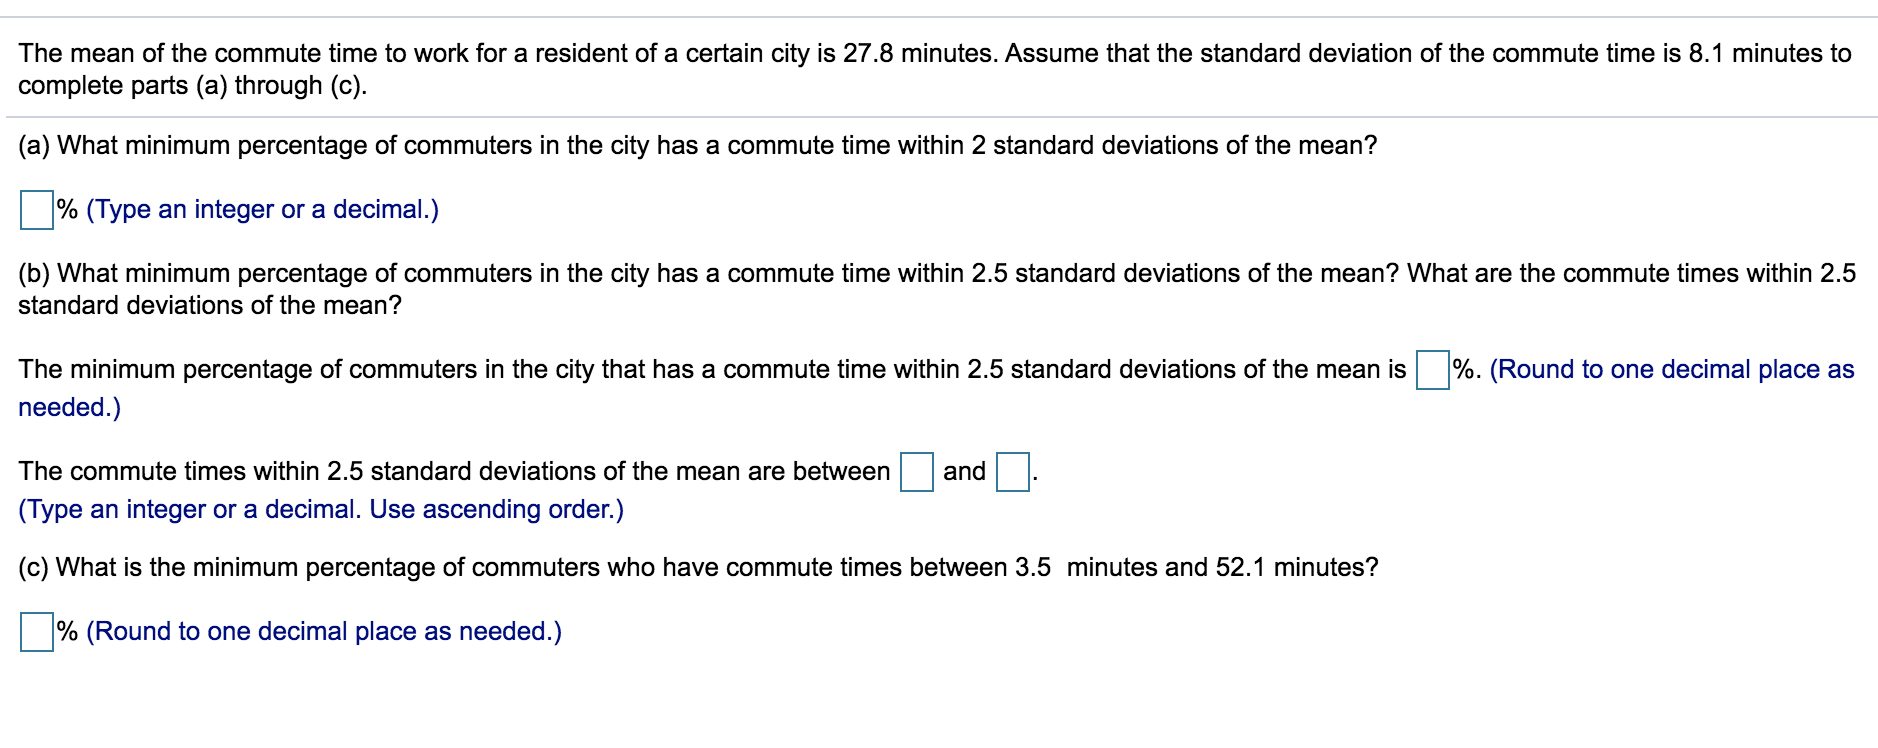 The mean of the commute time to work for a resident of a certain city is 27.8 minutes. Assume that the standard deviation of the commute time is 8.1 minutes to
complete parts (a) through (c).
(a) What minimum percentage of commuters in the city has a commute time within 2 standard deviations of the mean?
% (Type an integer or a decimal.)
(b) What minimum percentage of commuters in the city has a commute time within 2.5 standard deviations of the mean? What are the commute times within 2.5
standard deviations of the mean?
The minimum percentage of commuters in the city that has a commute time within 2.5 standard deviations of the mean is %. (Round to one decimal place as
needed.)
The commute times within 2.5 standard deviations of the mean are between
and
(Type an integer or a decimal. Use ascending order.)
(c) What is the minimum percentage of commuters who have commute times between 3.5 minutes and 52.1 minutes?
|% (Round to one decimal place as needed.)
